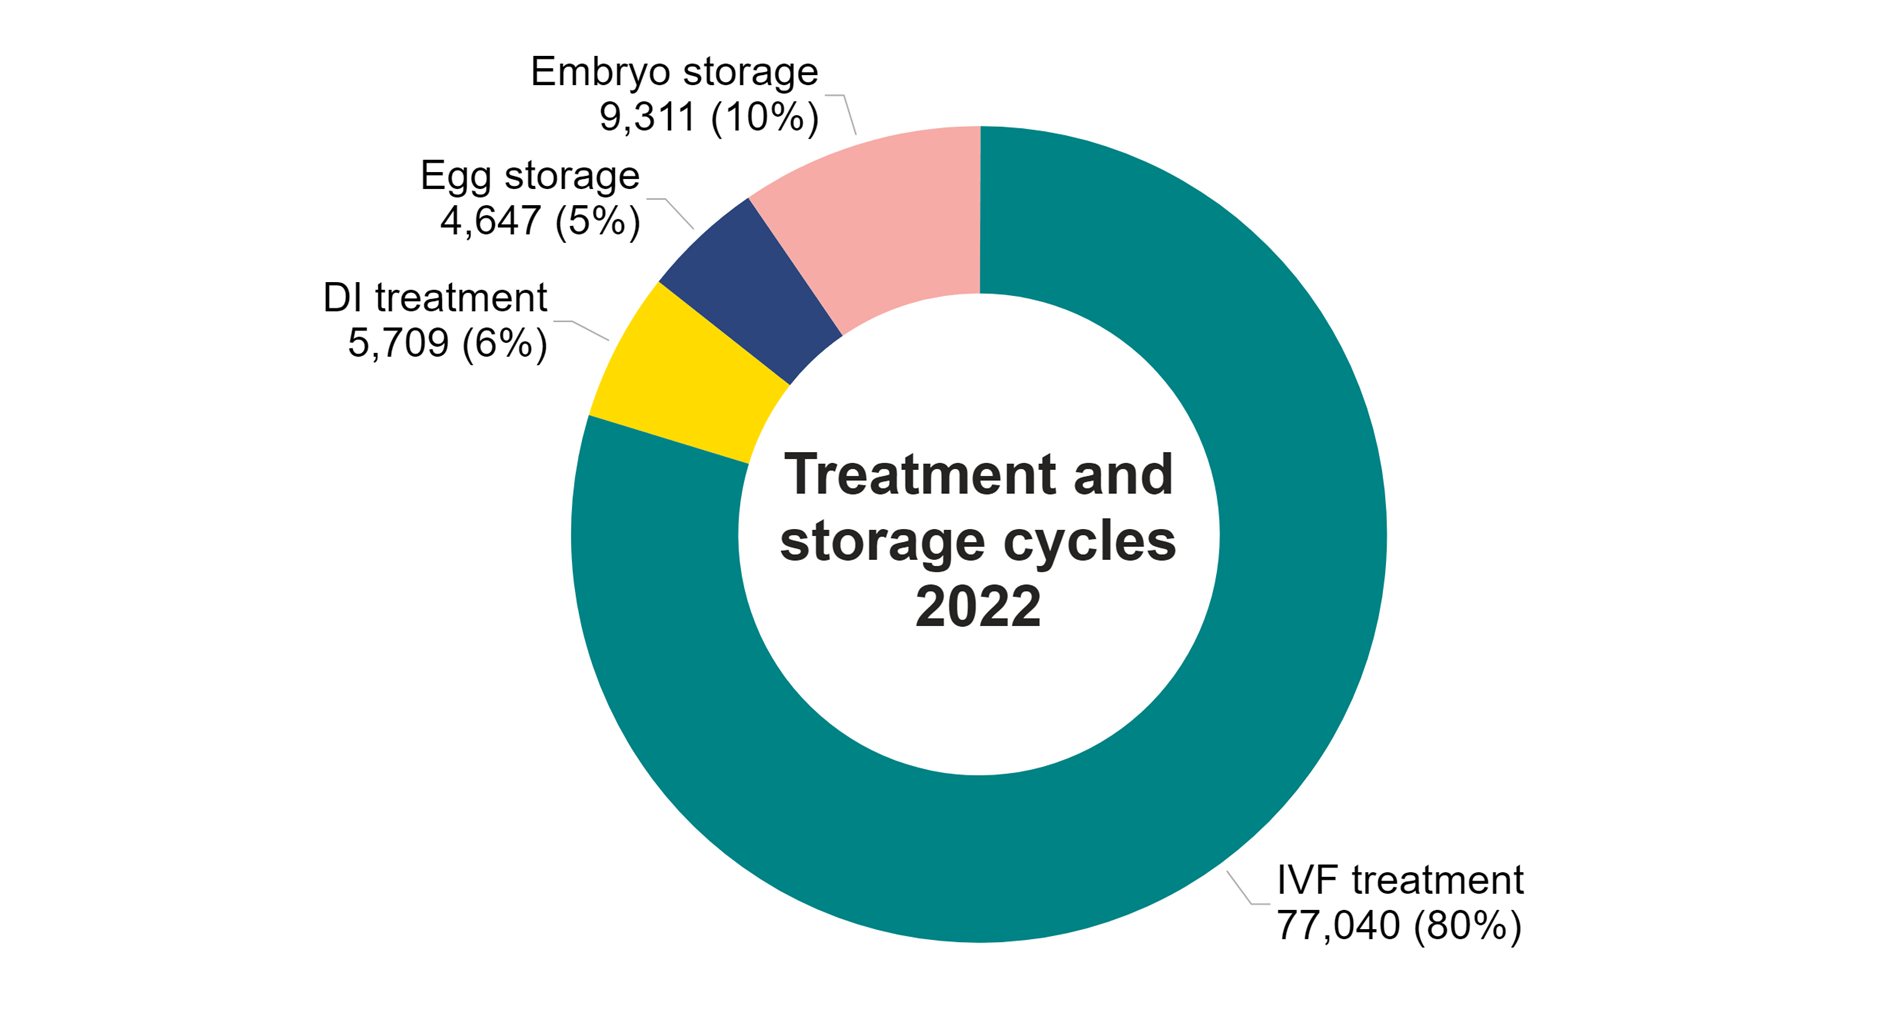 Doughnut chart showing the proportion of cycle types carried out in 2022.